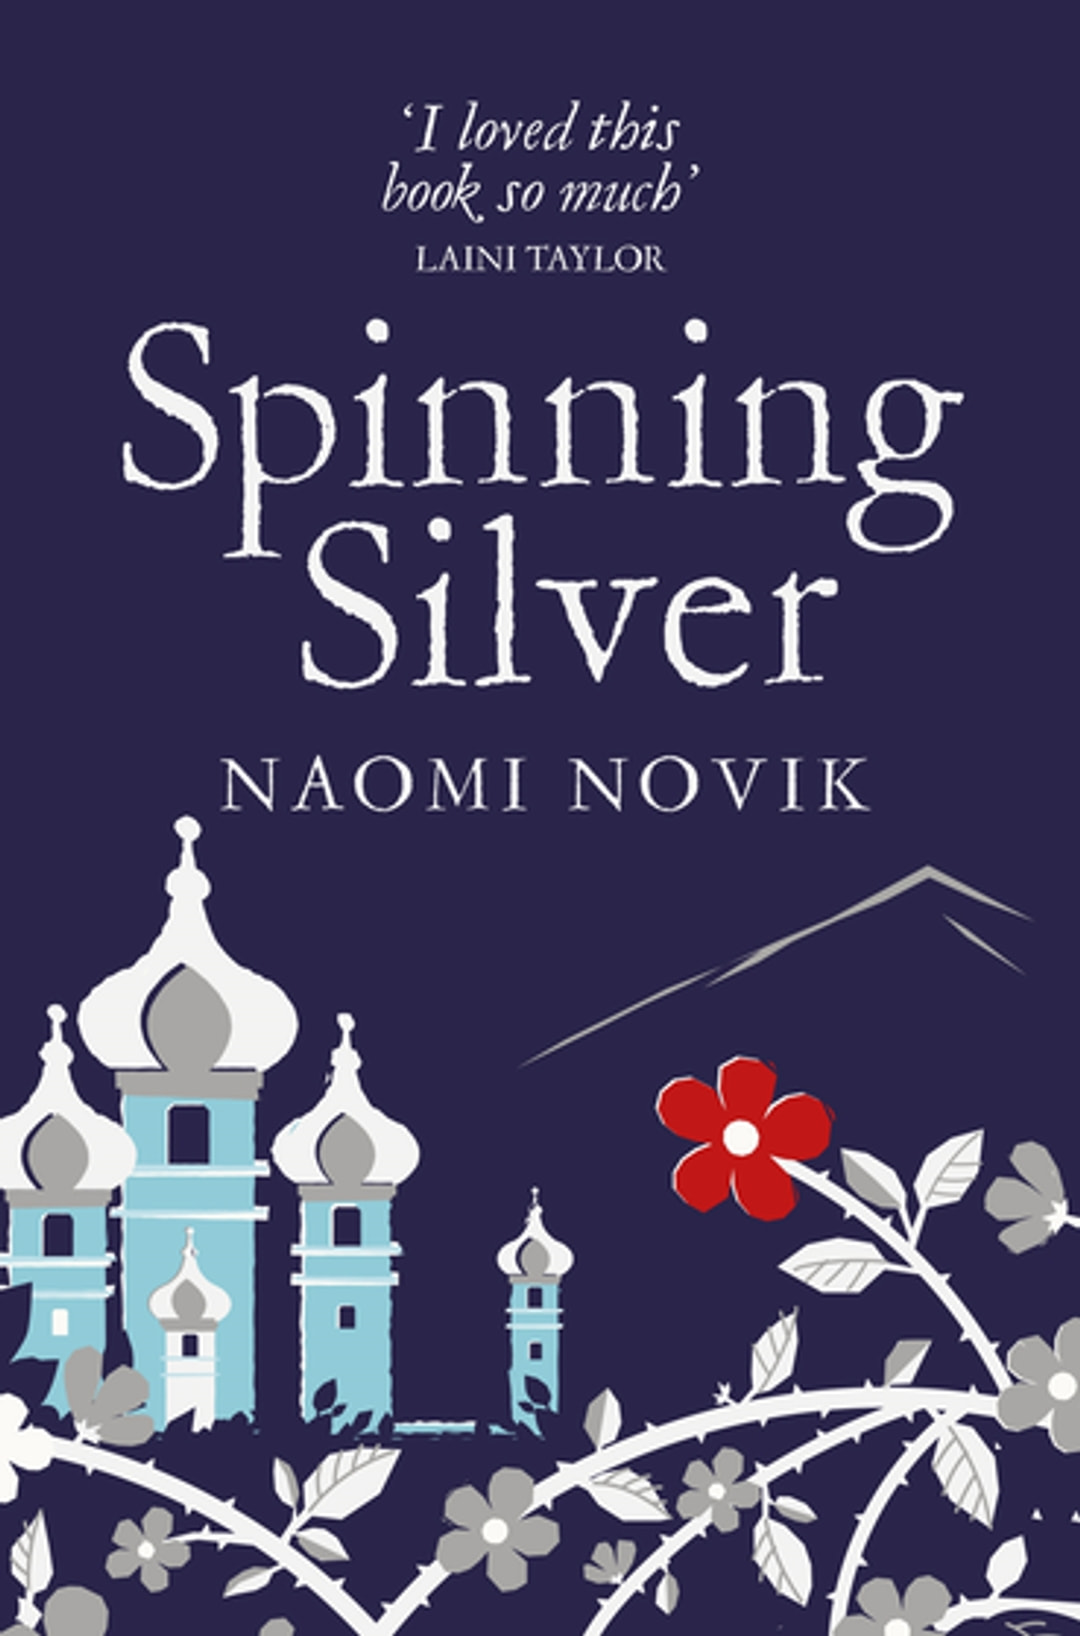 Spinning Silver (2018, Random House Publishing Group)